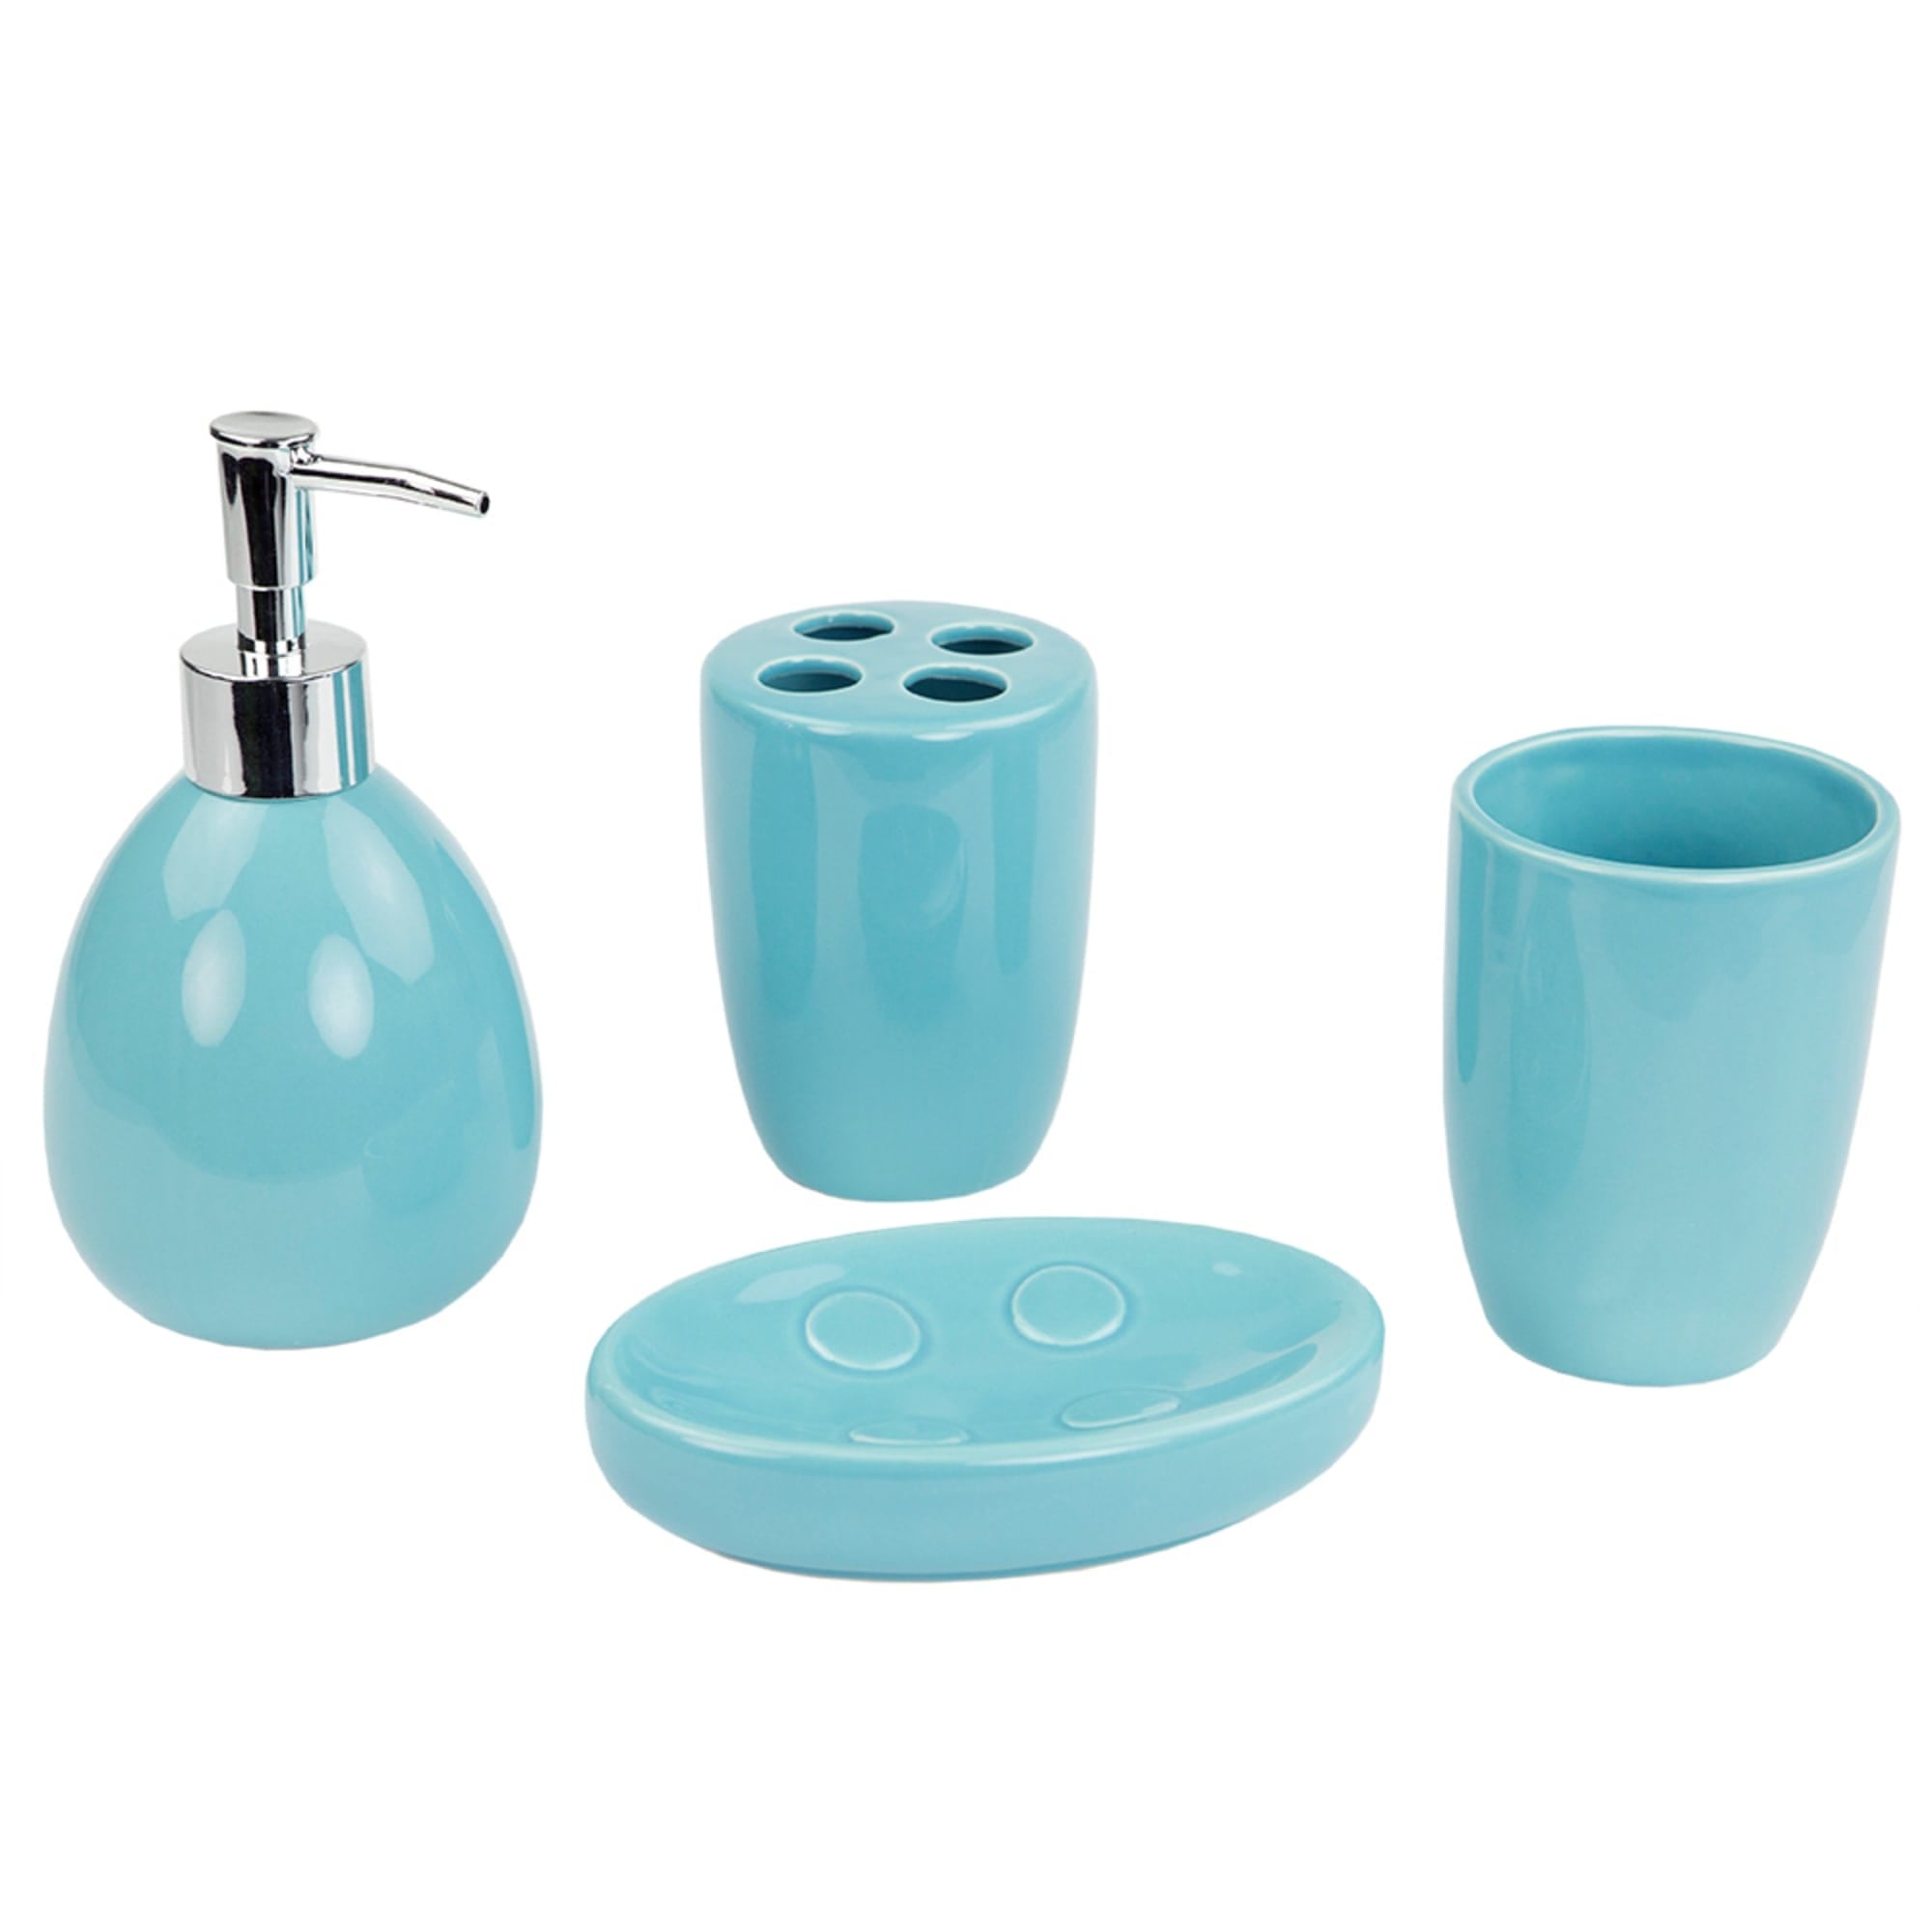 Home Basics 4 Piece Bath Accessory Set, Turquoise $10.00 EACH, CASE PACK OF 12